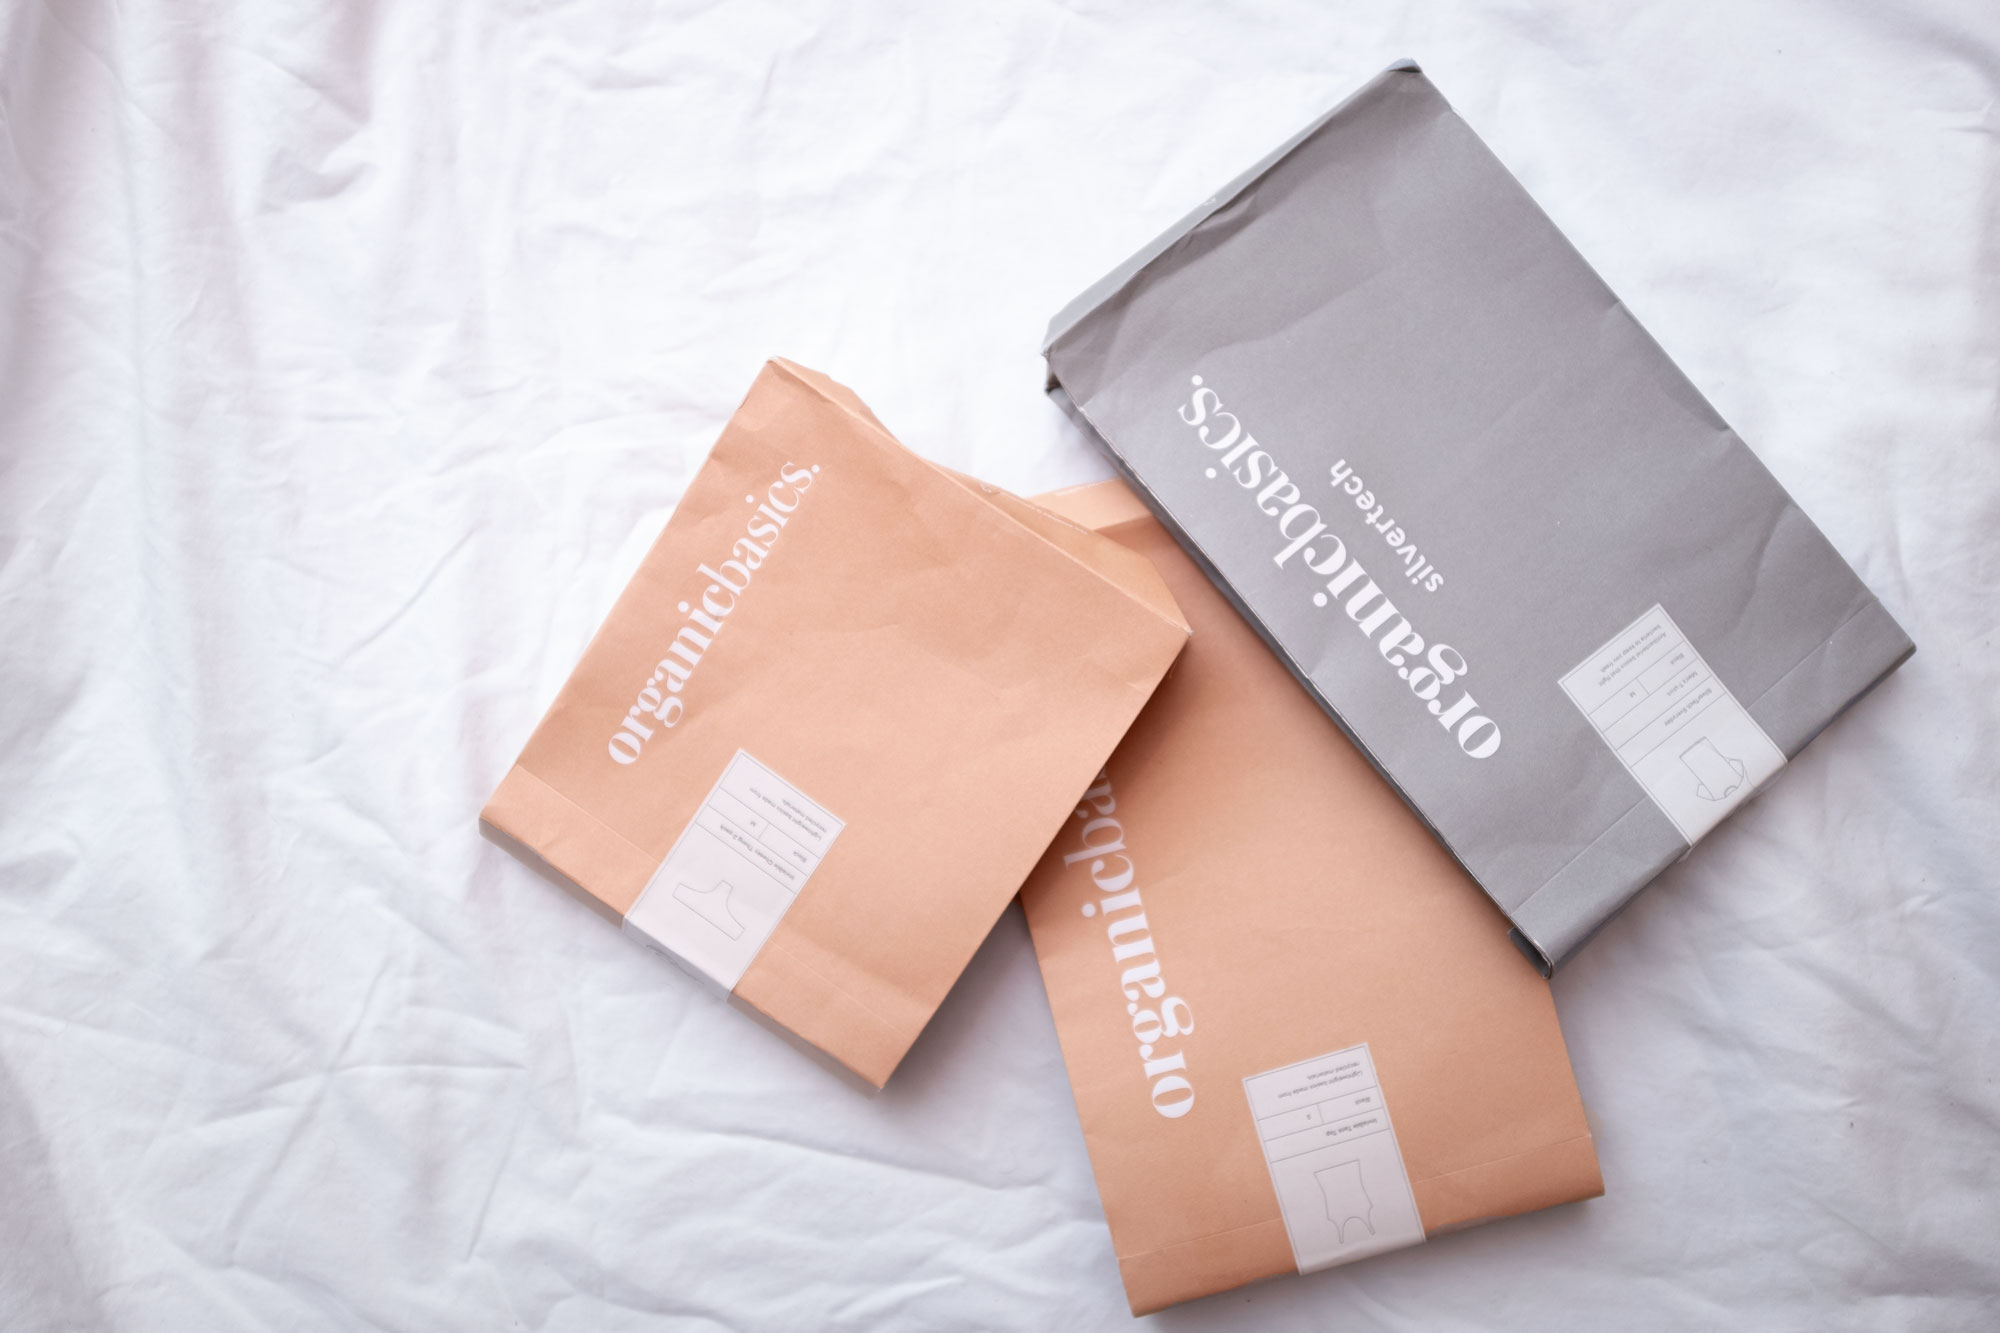 Organic Basics Packaging on a white bed sheet